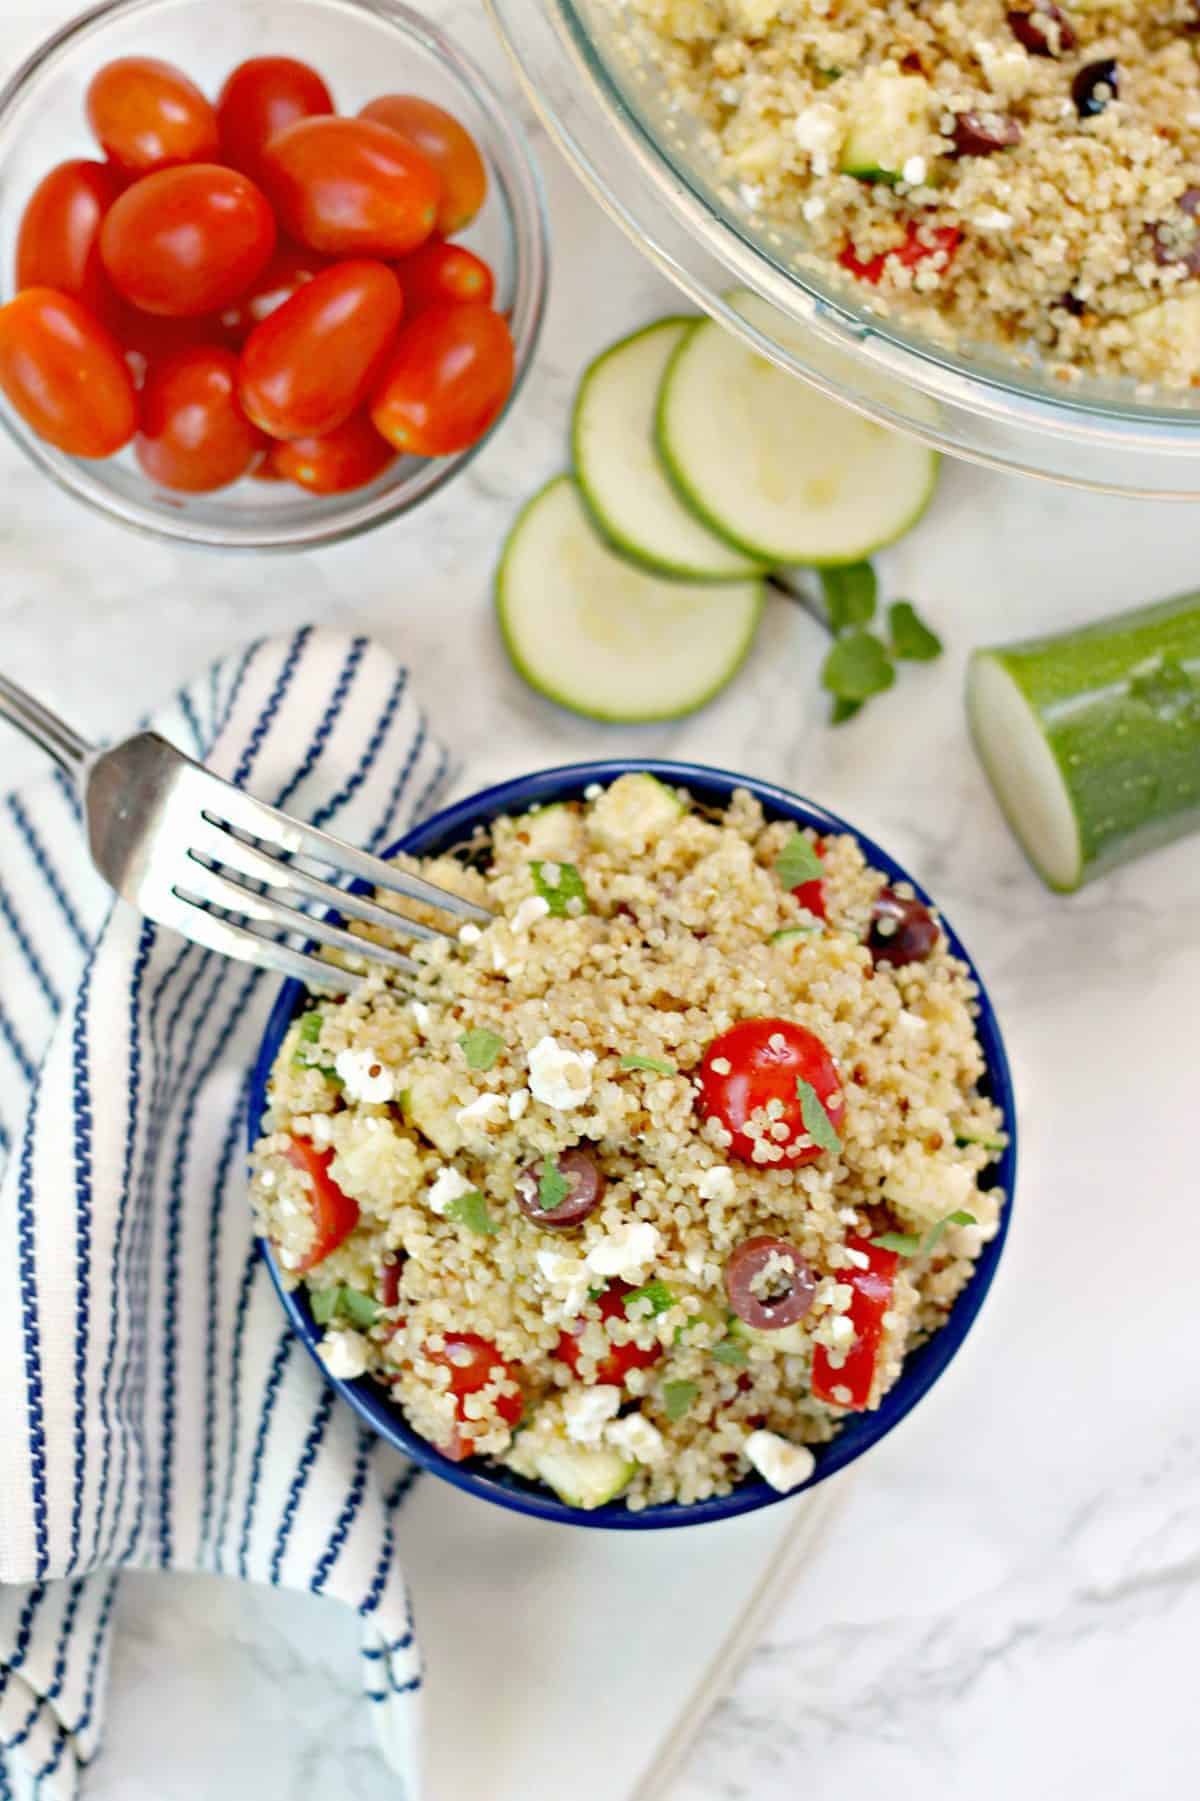 Overhead shot of Mediterranean Quinoa Salad with fork, sliced zucchini and grape tomatoes in bowl.